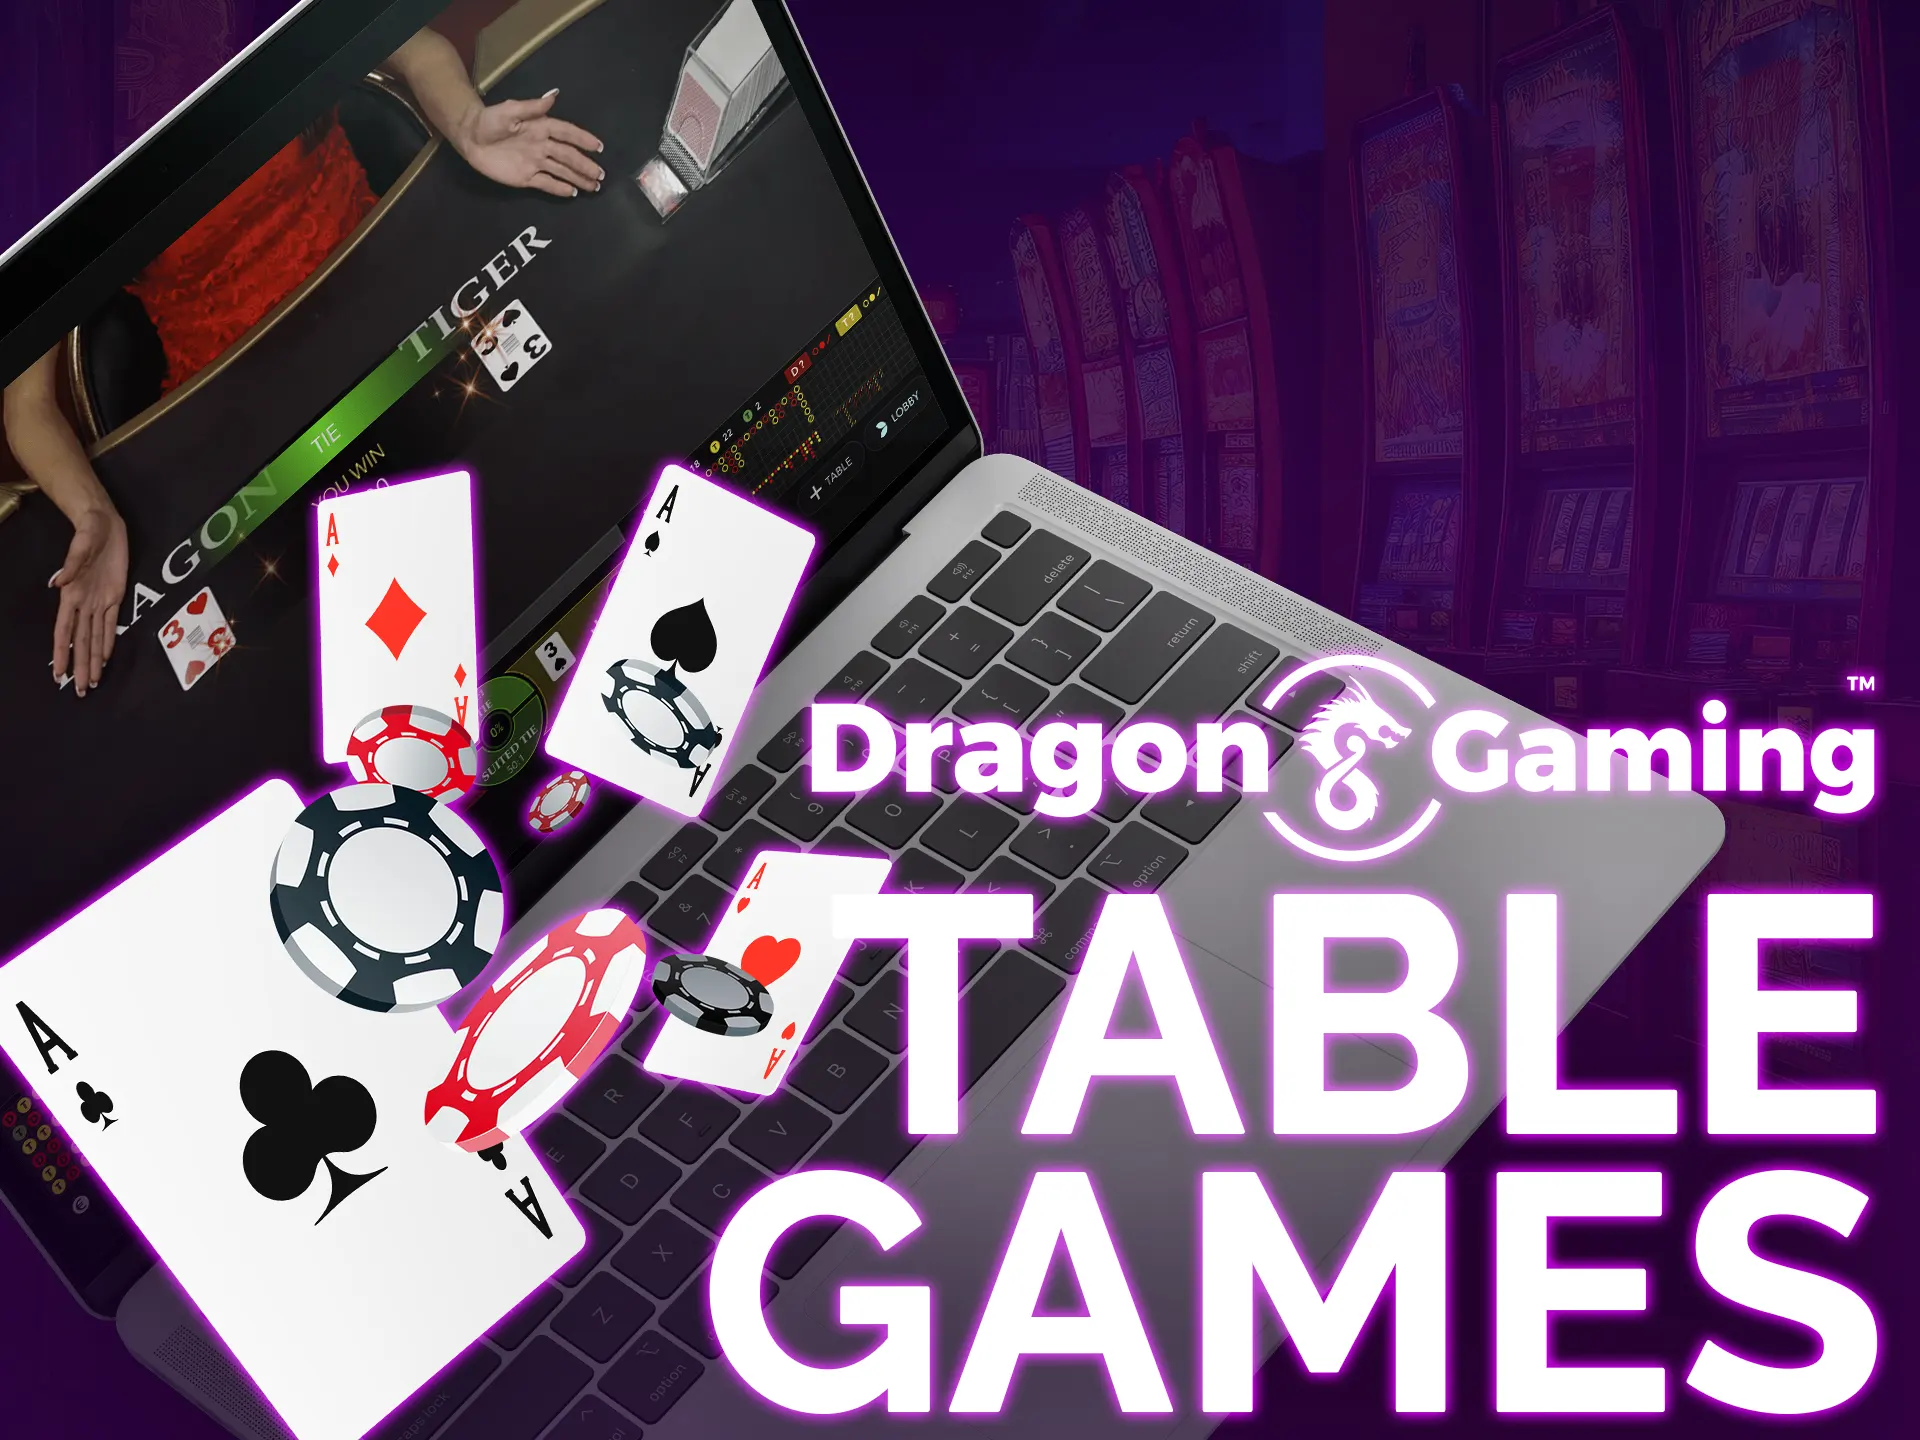 Find Dragon Gaming's table games, including Blackjack and Roulette.